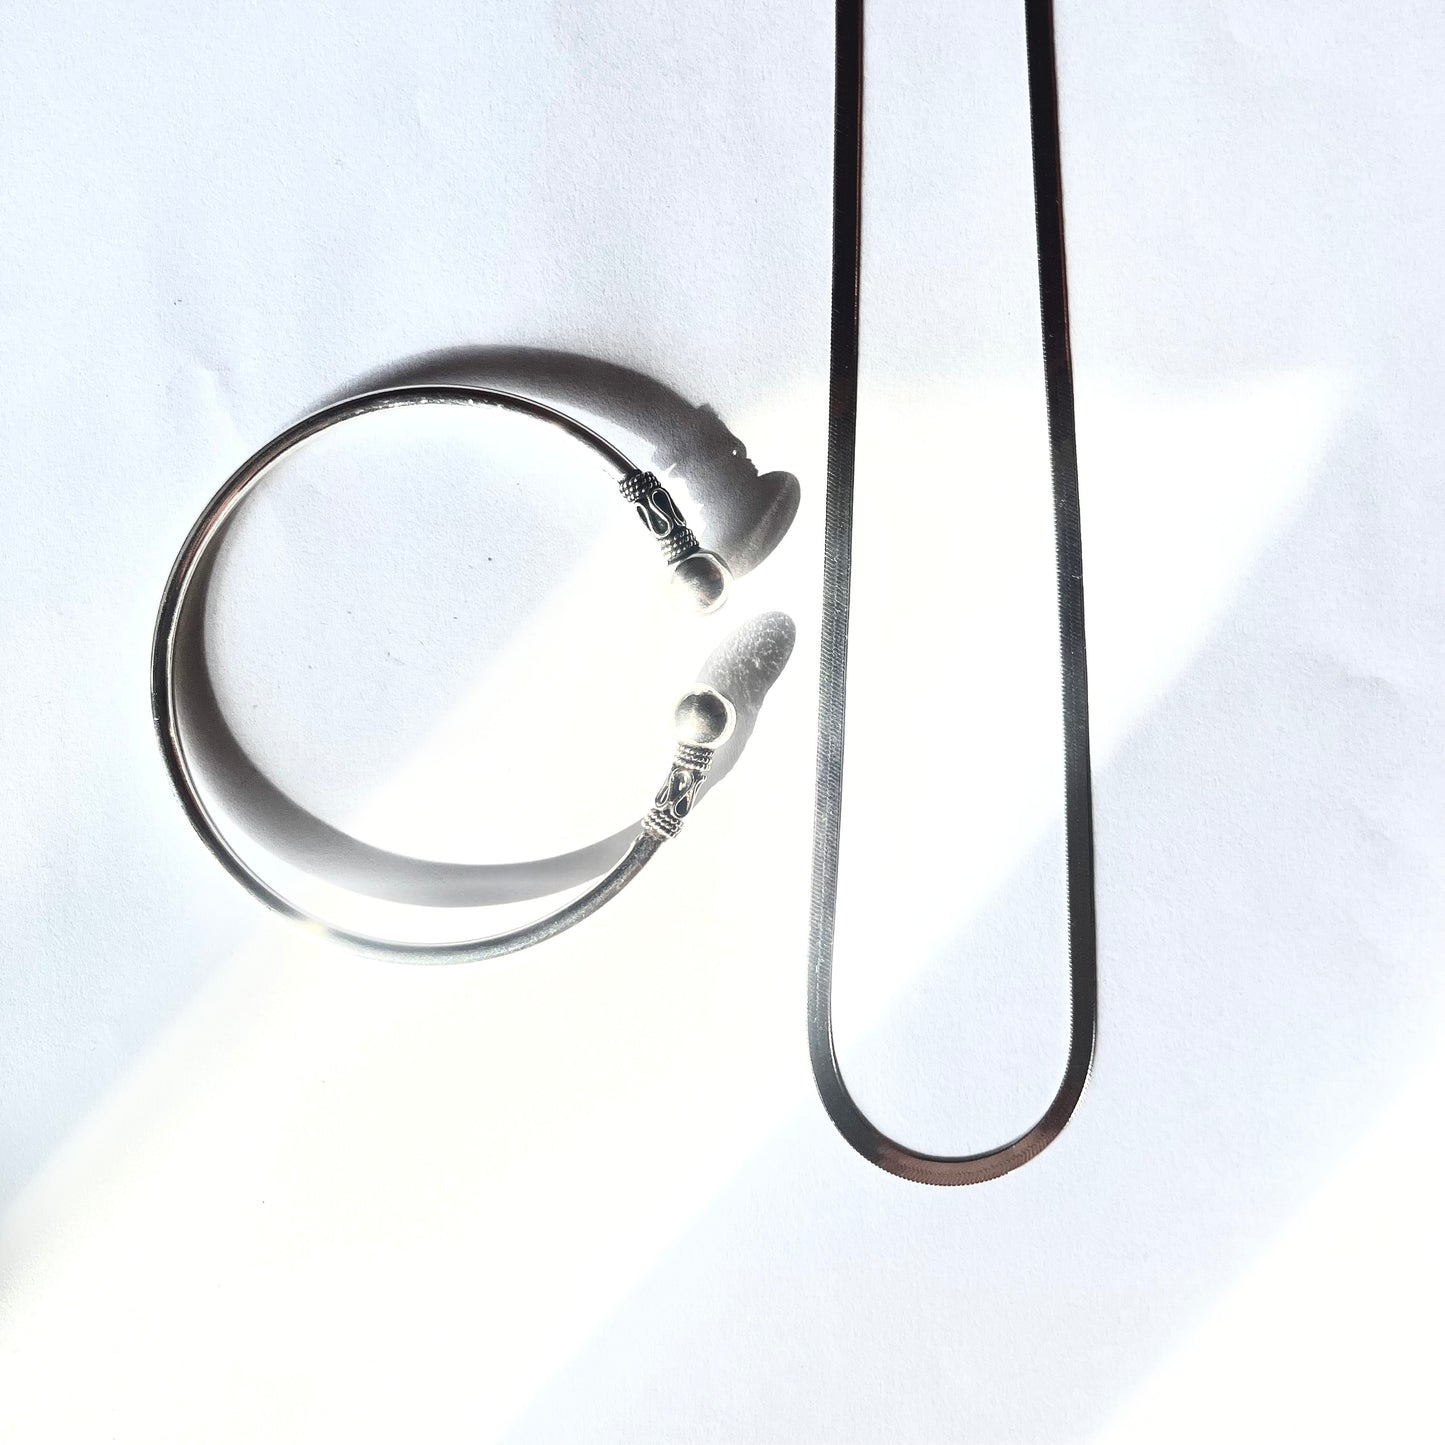 Omega Necklace (Silver)